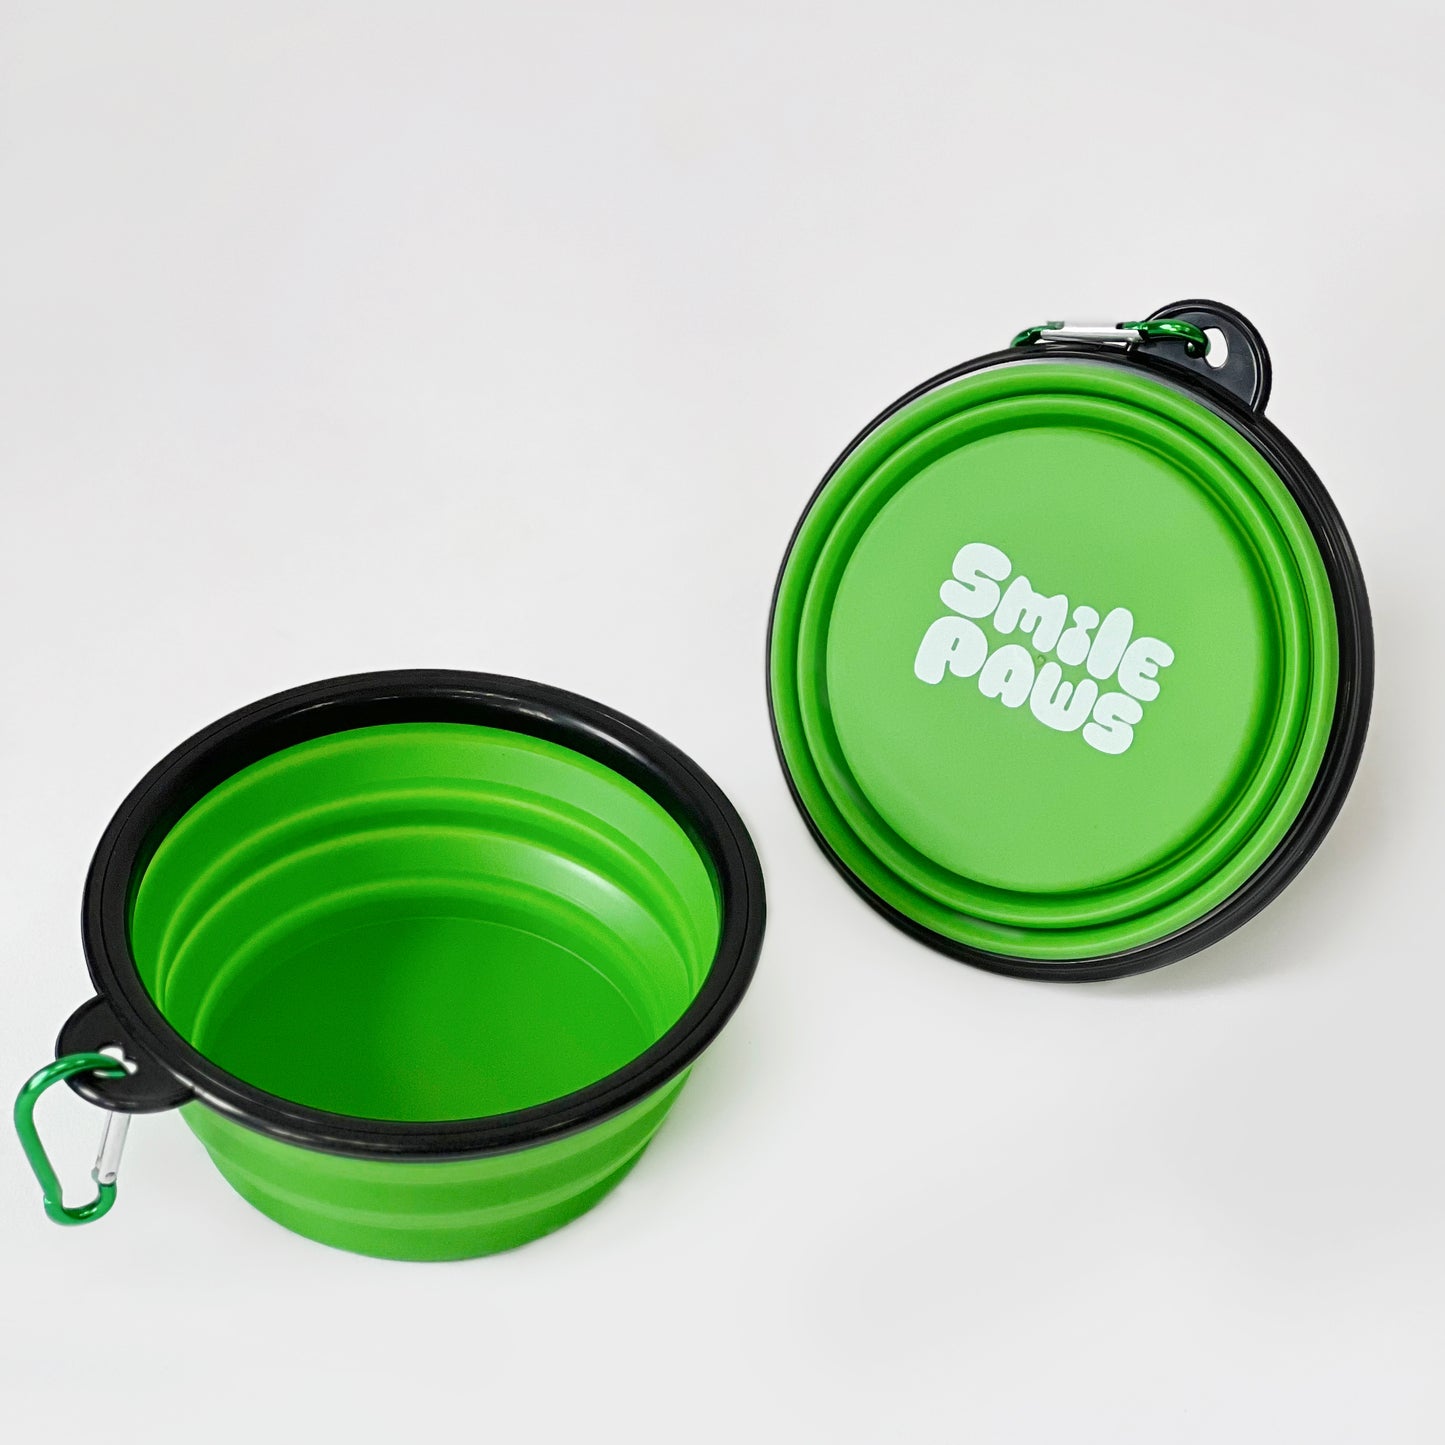 Smile Paws Collapsible Cat Bowl 1PC Pawsland